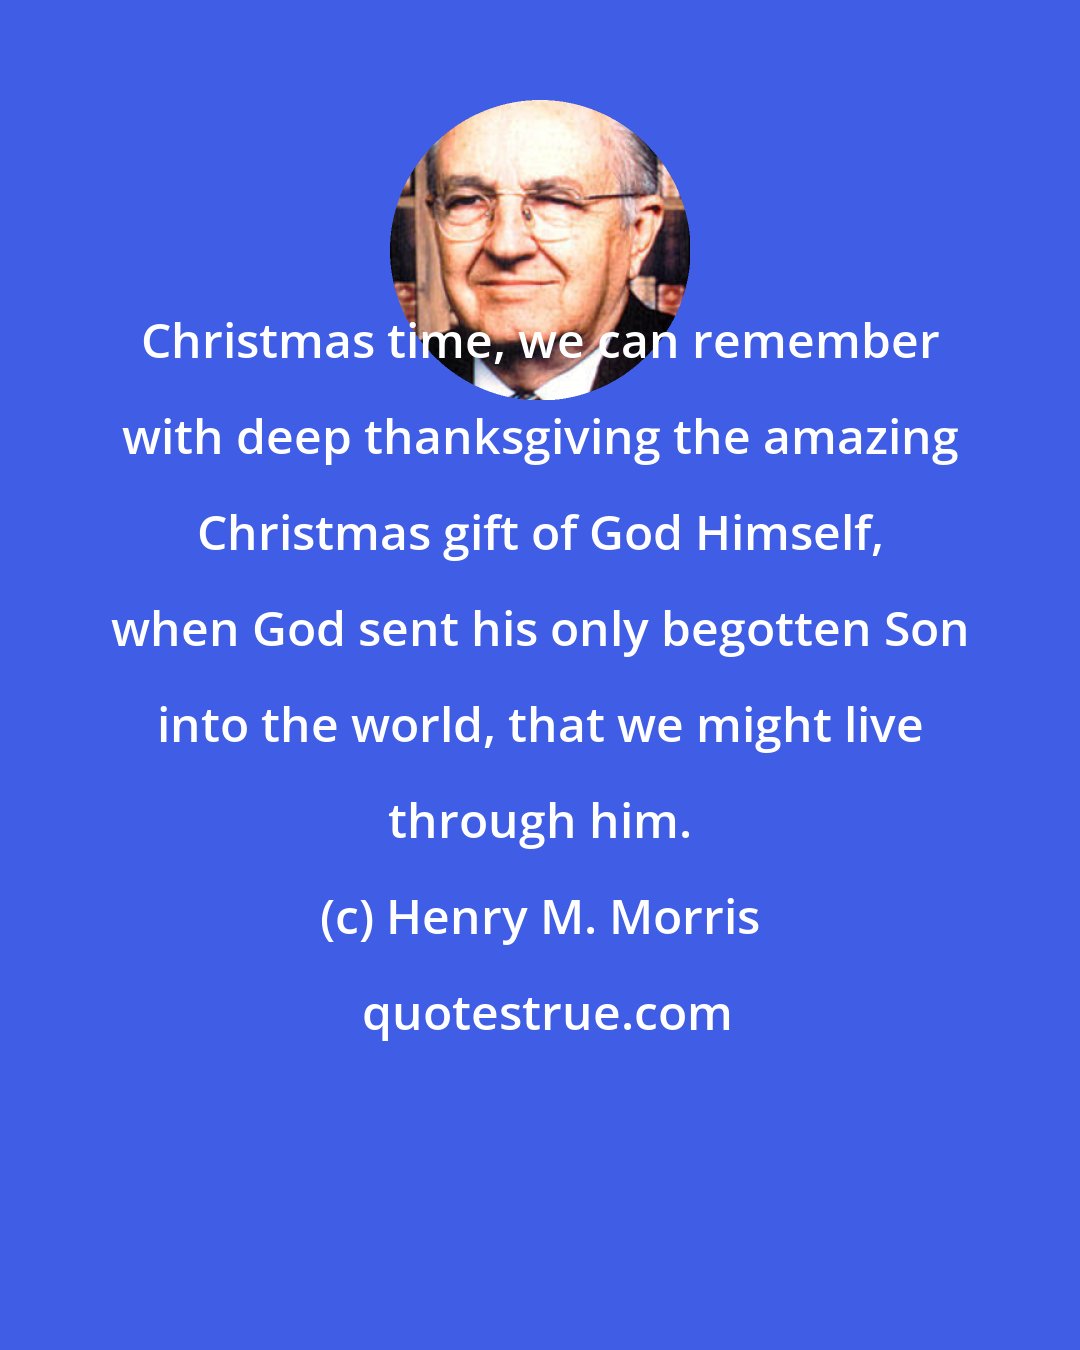 Henry M. Morris: Christmas time, we can remember with deep thanksgiving the amazing Christmas gift of God Himself, when God sent his only begotten Son into the world, that we might live through him.